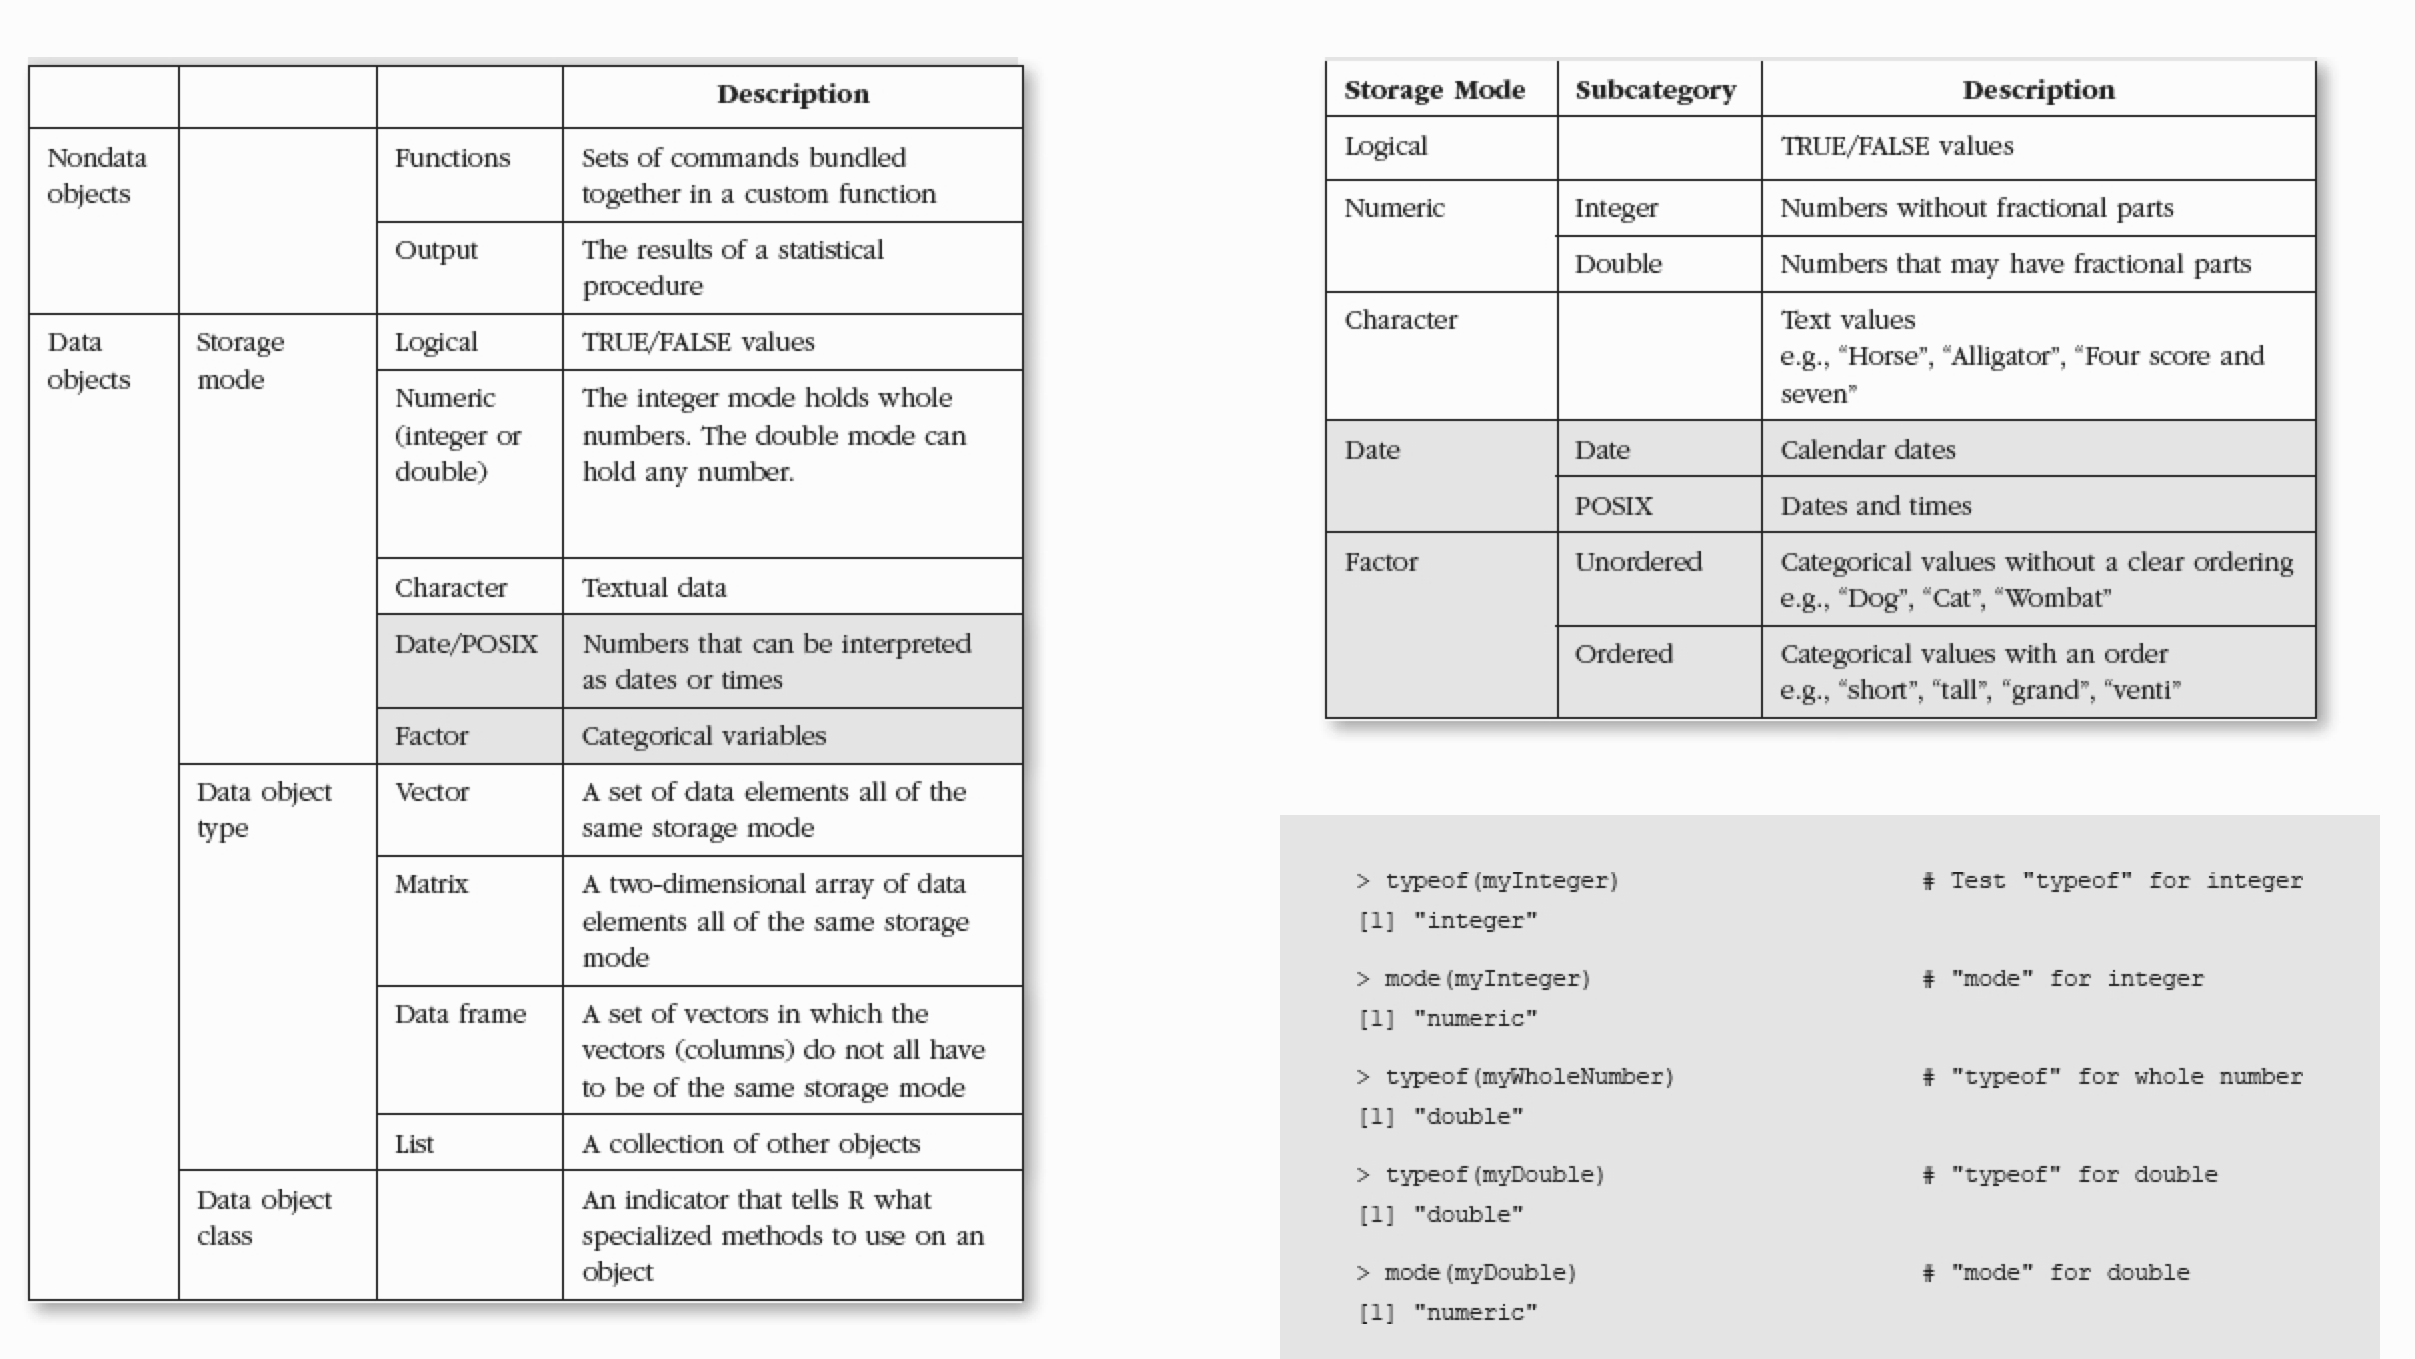 R data formats. Tables from Gaubatz, K. T. (2014). [A Survivor's Guide to R: An Introduction for the Uninitiated and the Unnerved](https://us.sagepub.com/en-us/nam/a-survivors-guide-to-r/book242607). SAGE Publications.